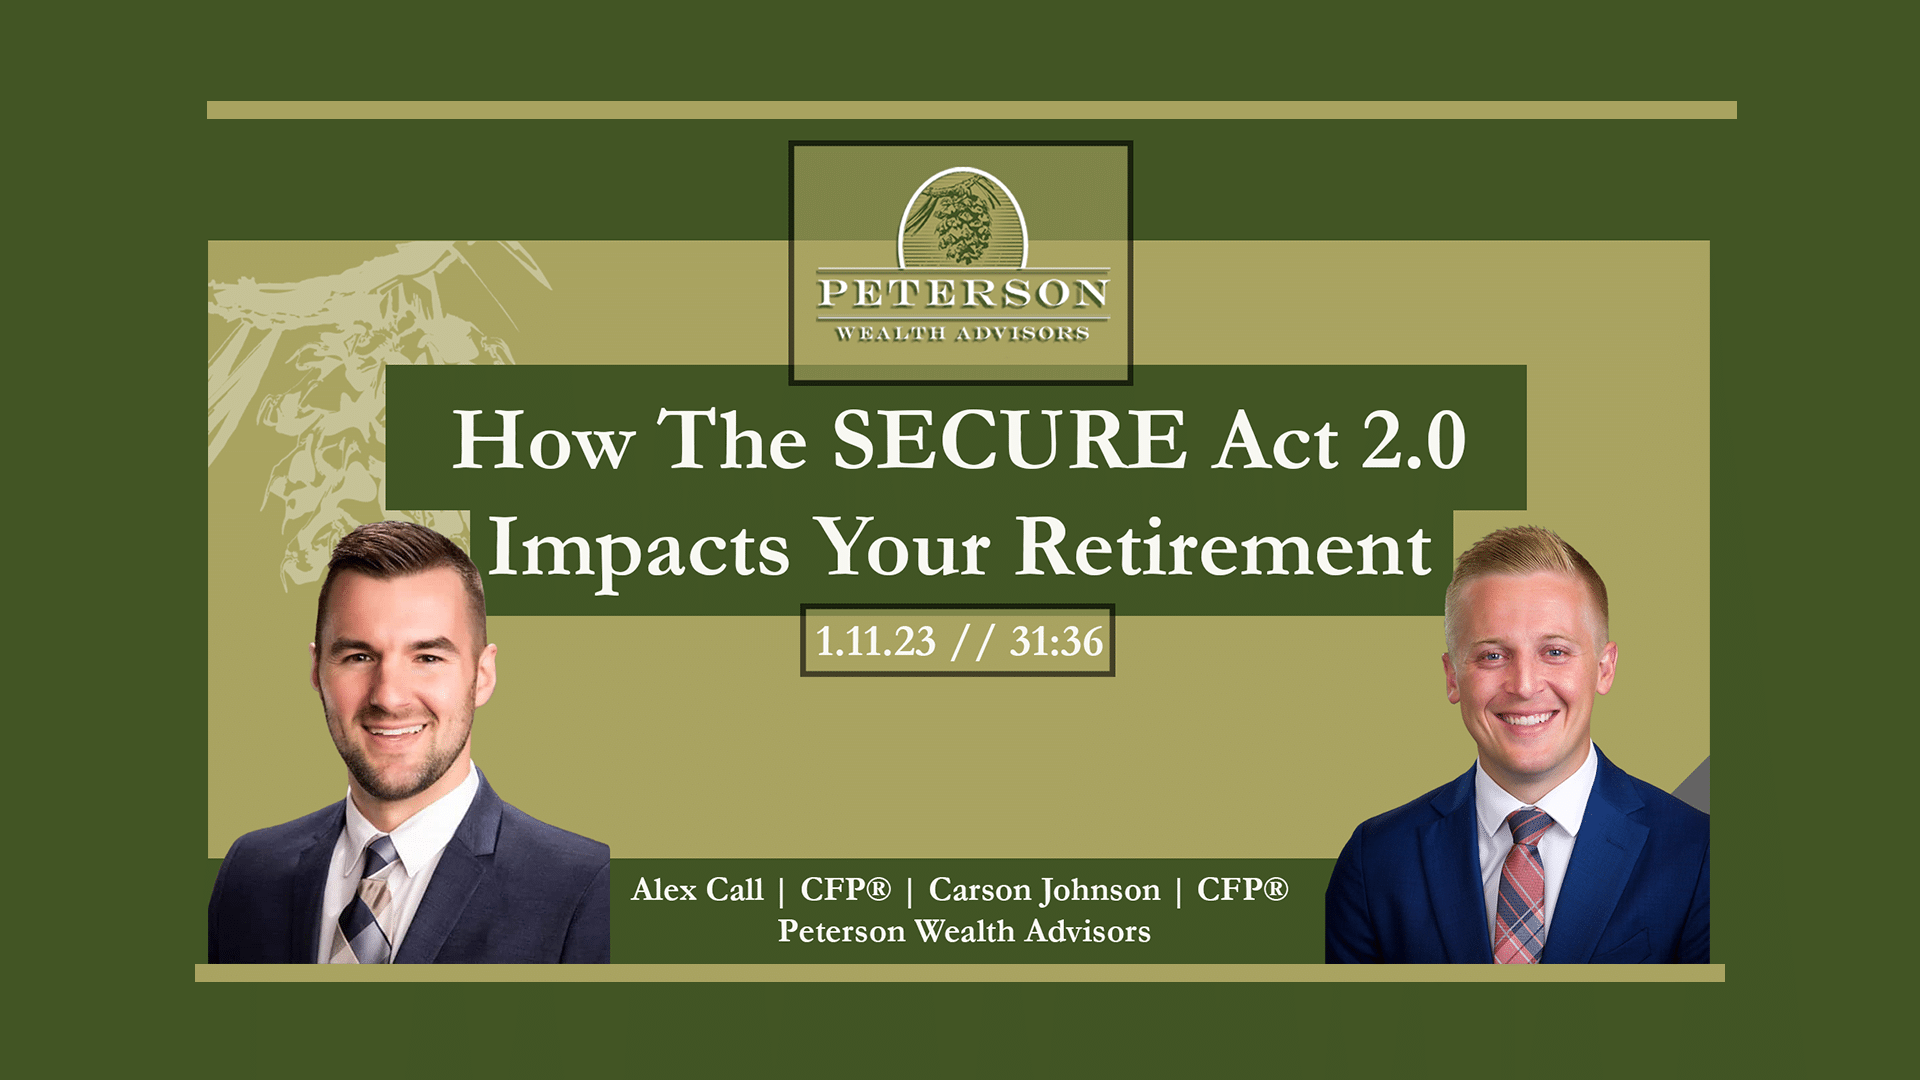 How The SECURE Act 2.0 Impacts Your Retirement